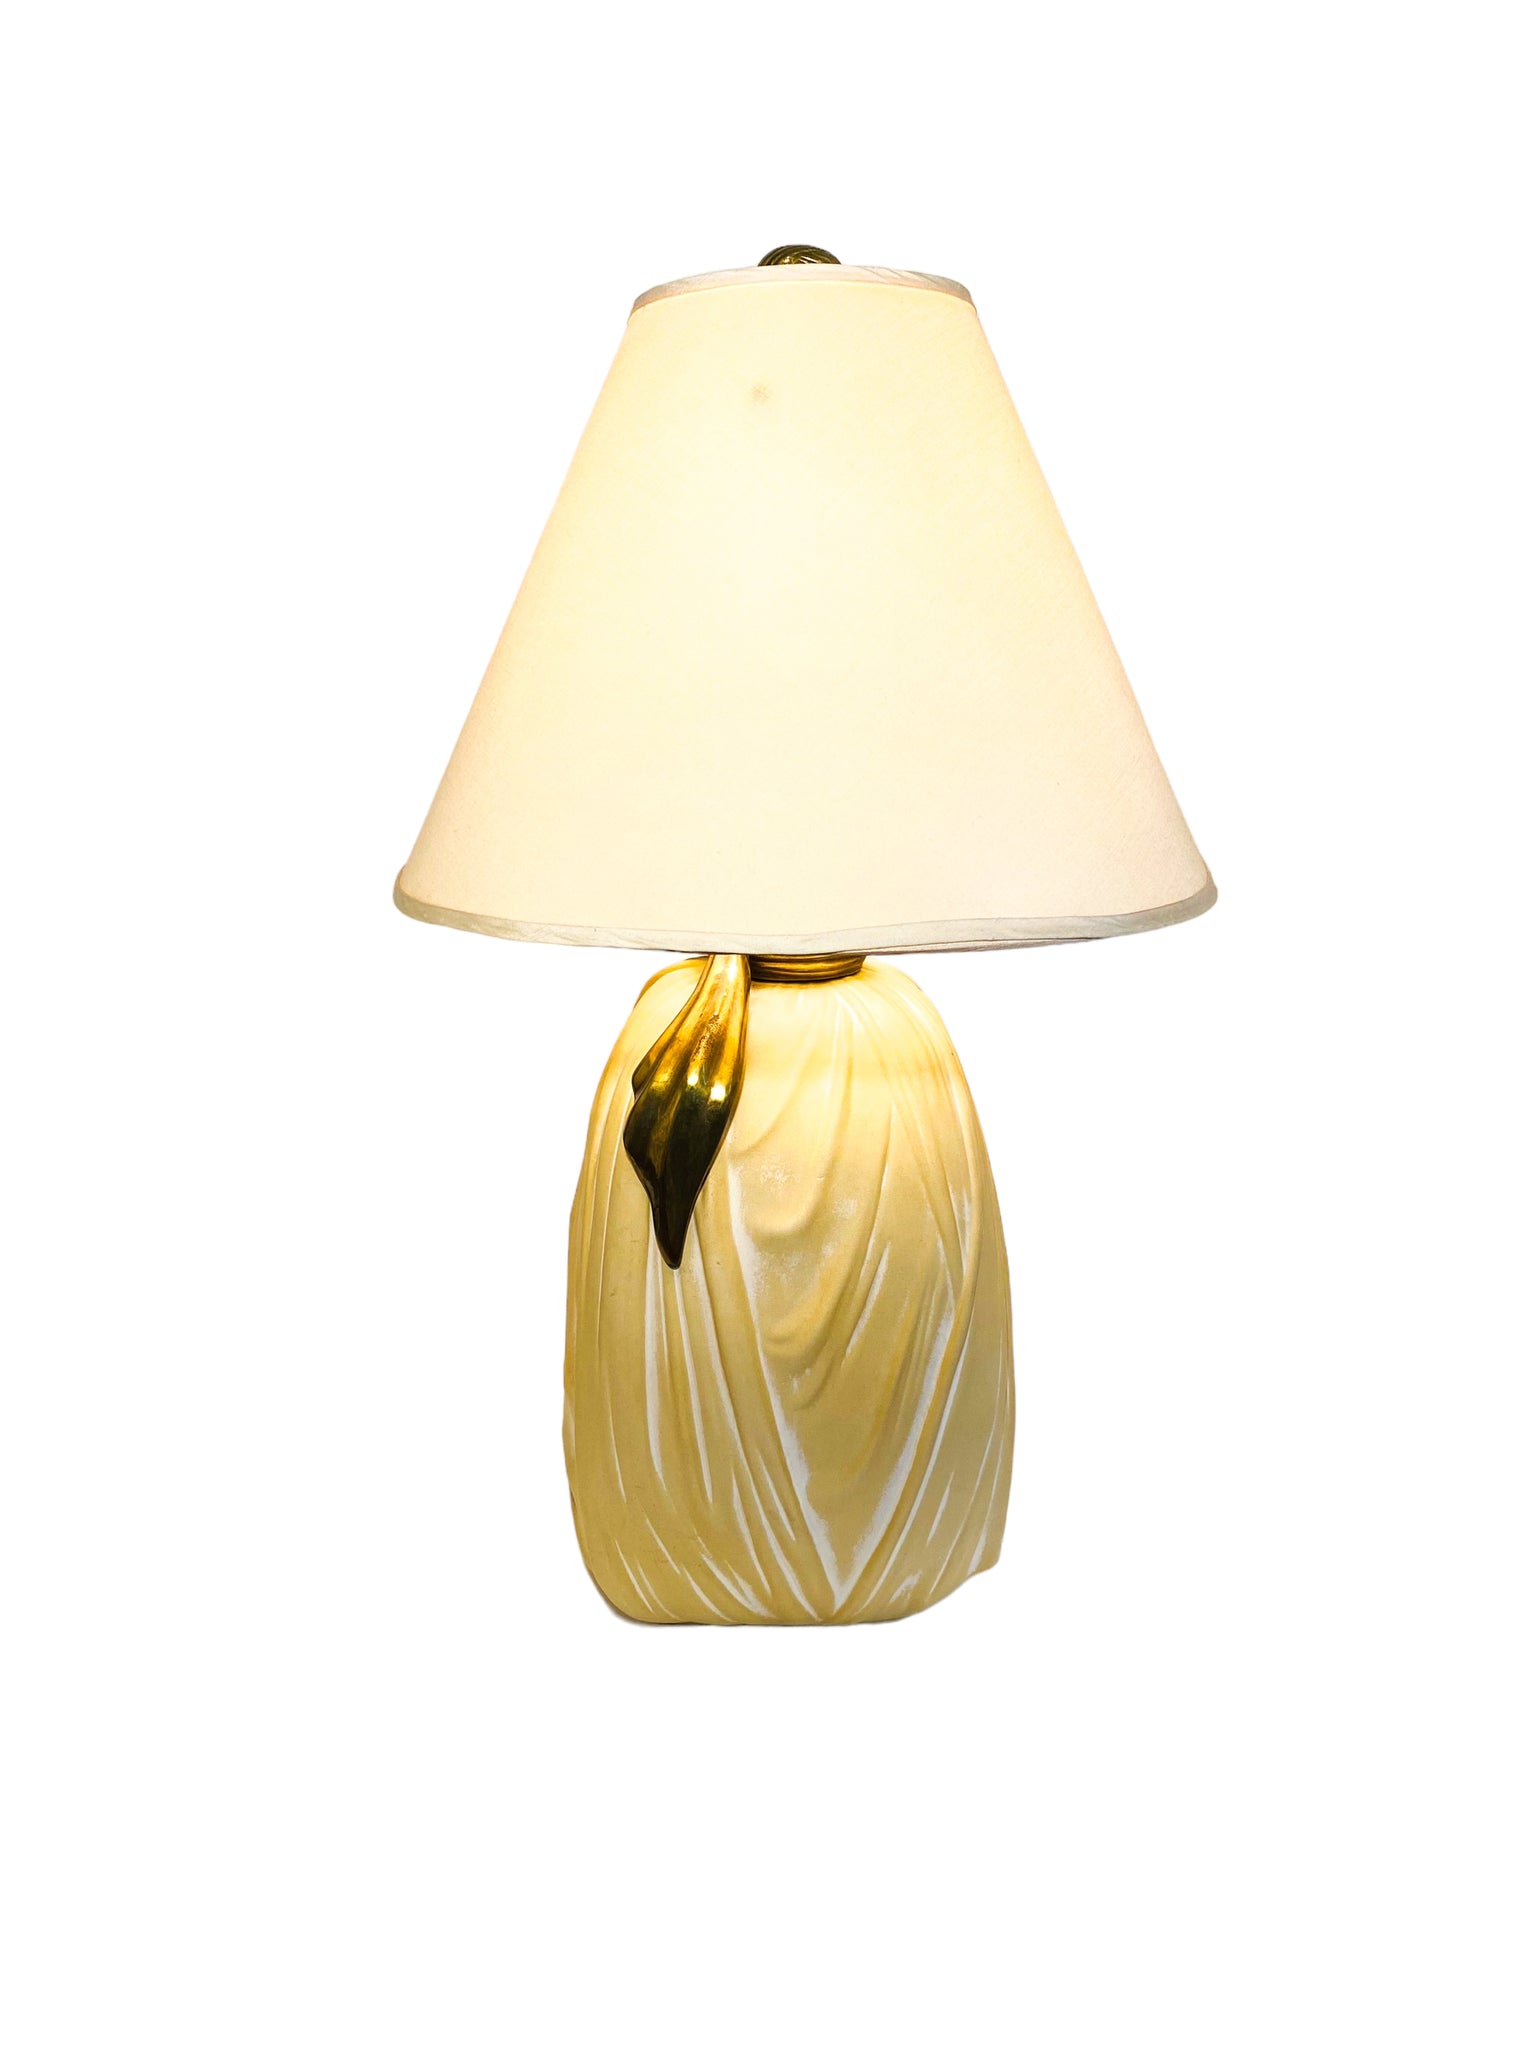 1982 Chapman Draped-Fabric Table Lamp, Local Pickup Only**